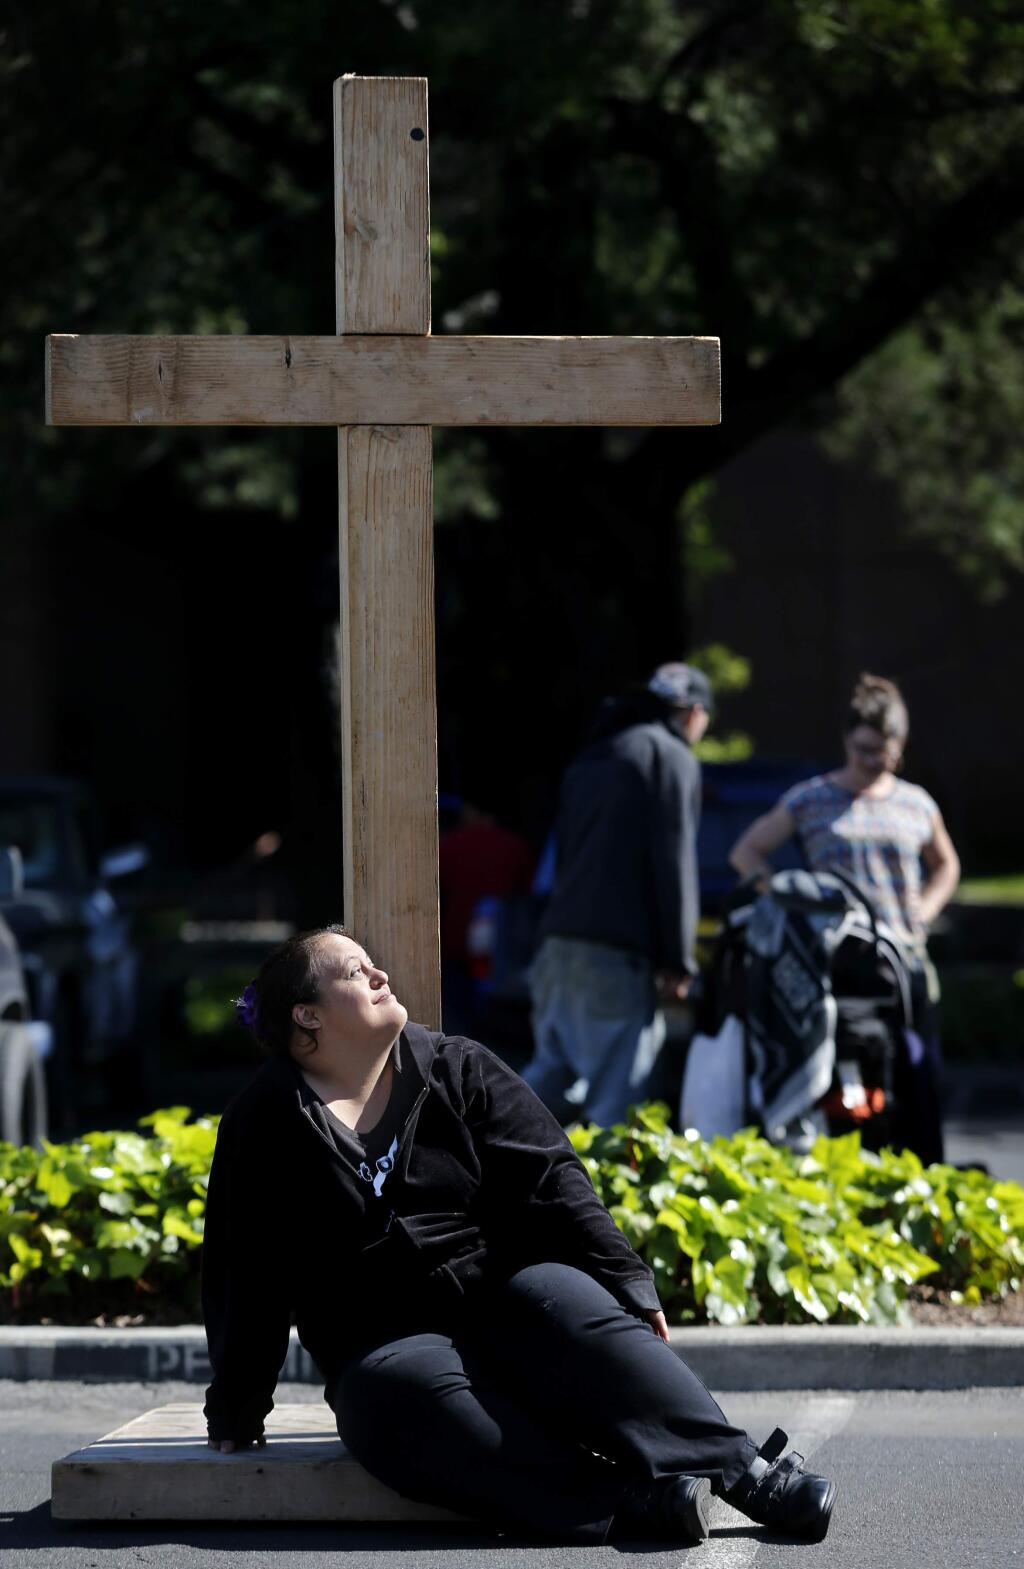 Angel Huerta rests during an Easter worship service organized by SOMA Church Community in the parking lot of City Hall in Santa Rosa, on Sunday, March 27, 2016. (BETH SCHLANKER/ The Press Democrat)